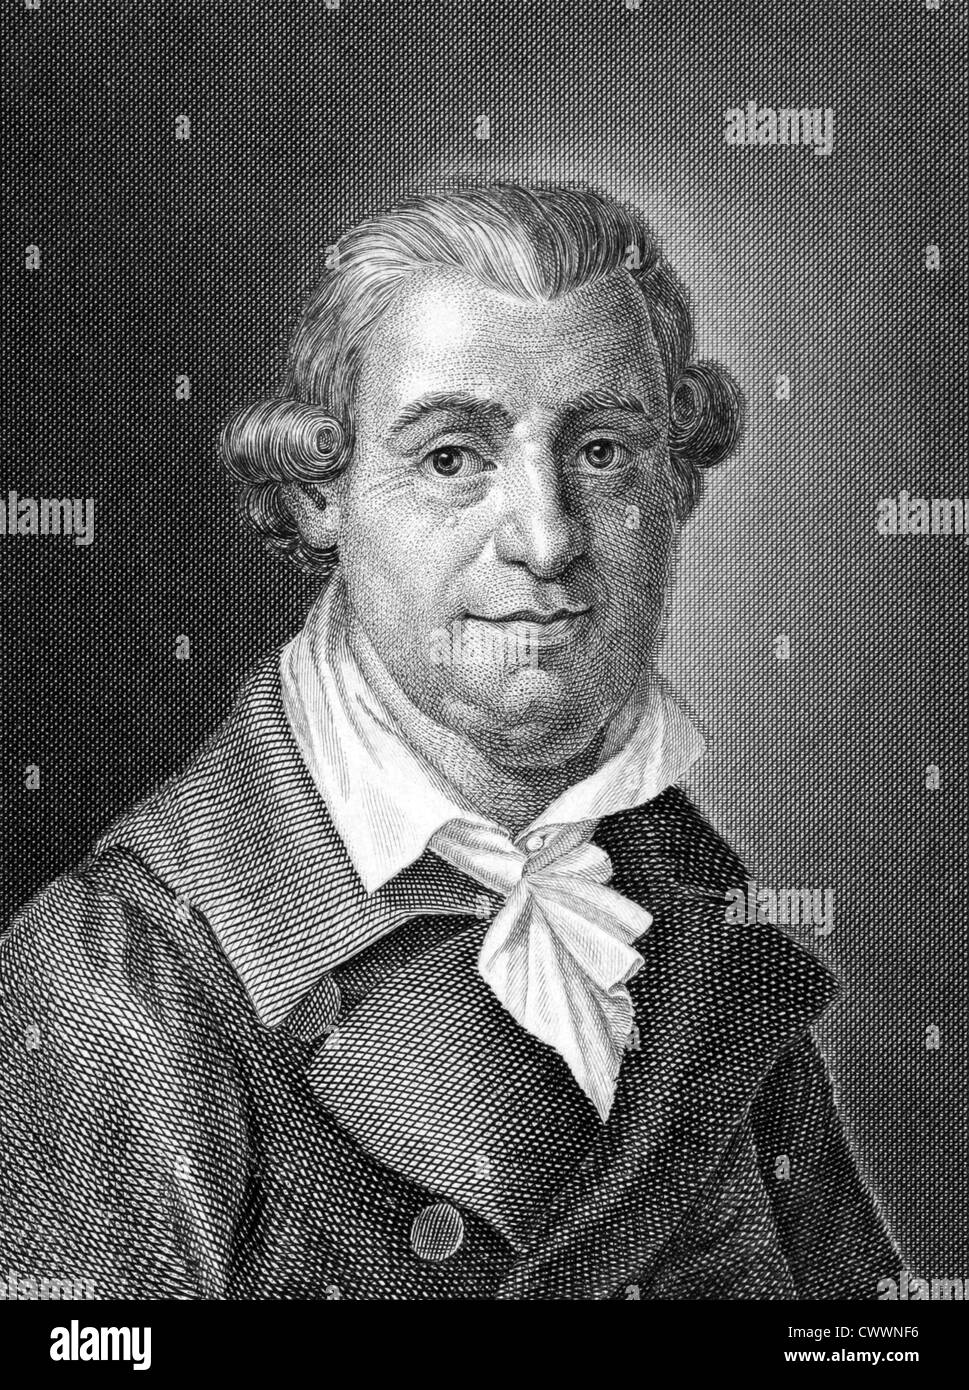 Johann Karl August Musaus (1735-1787) on engraving from 1859. German author. Stock Photo